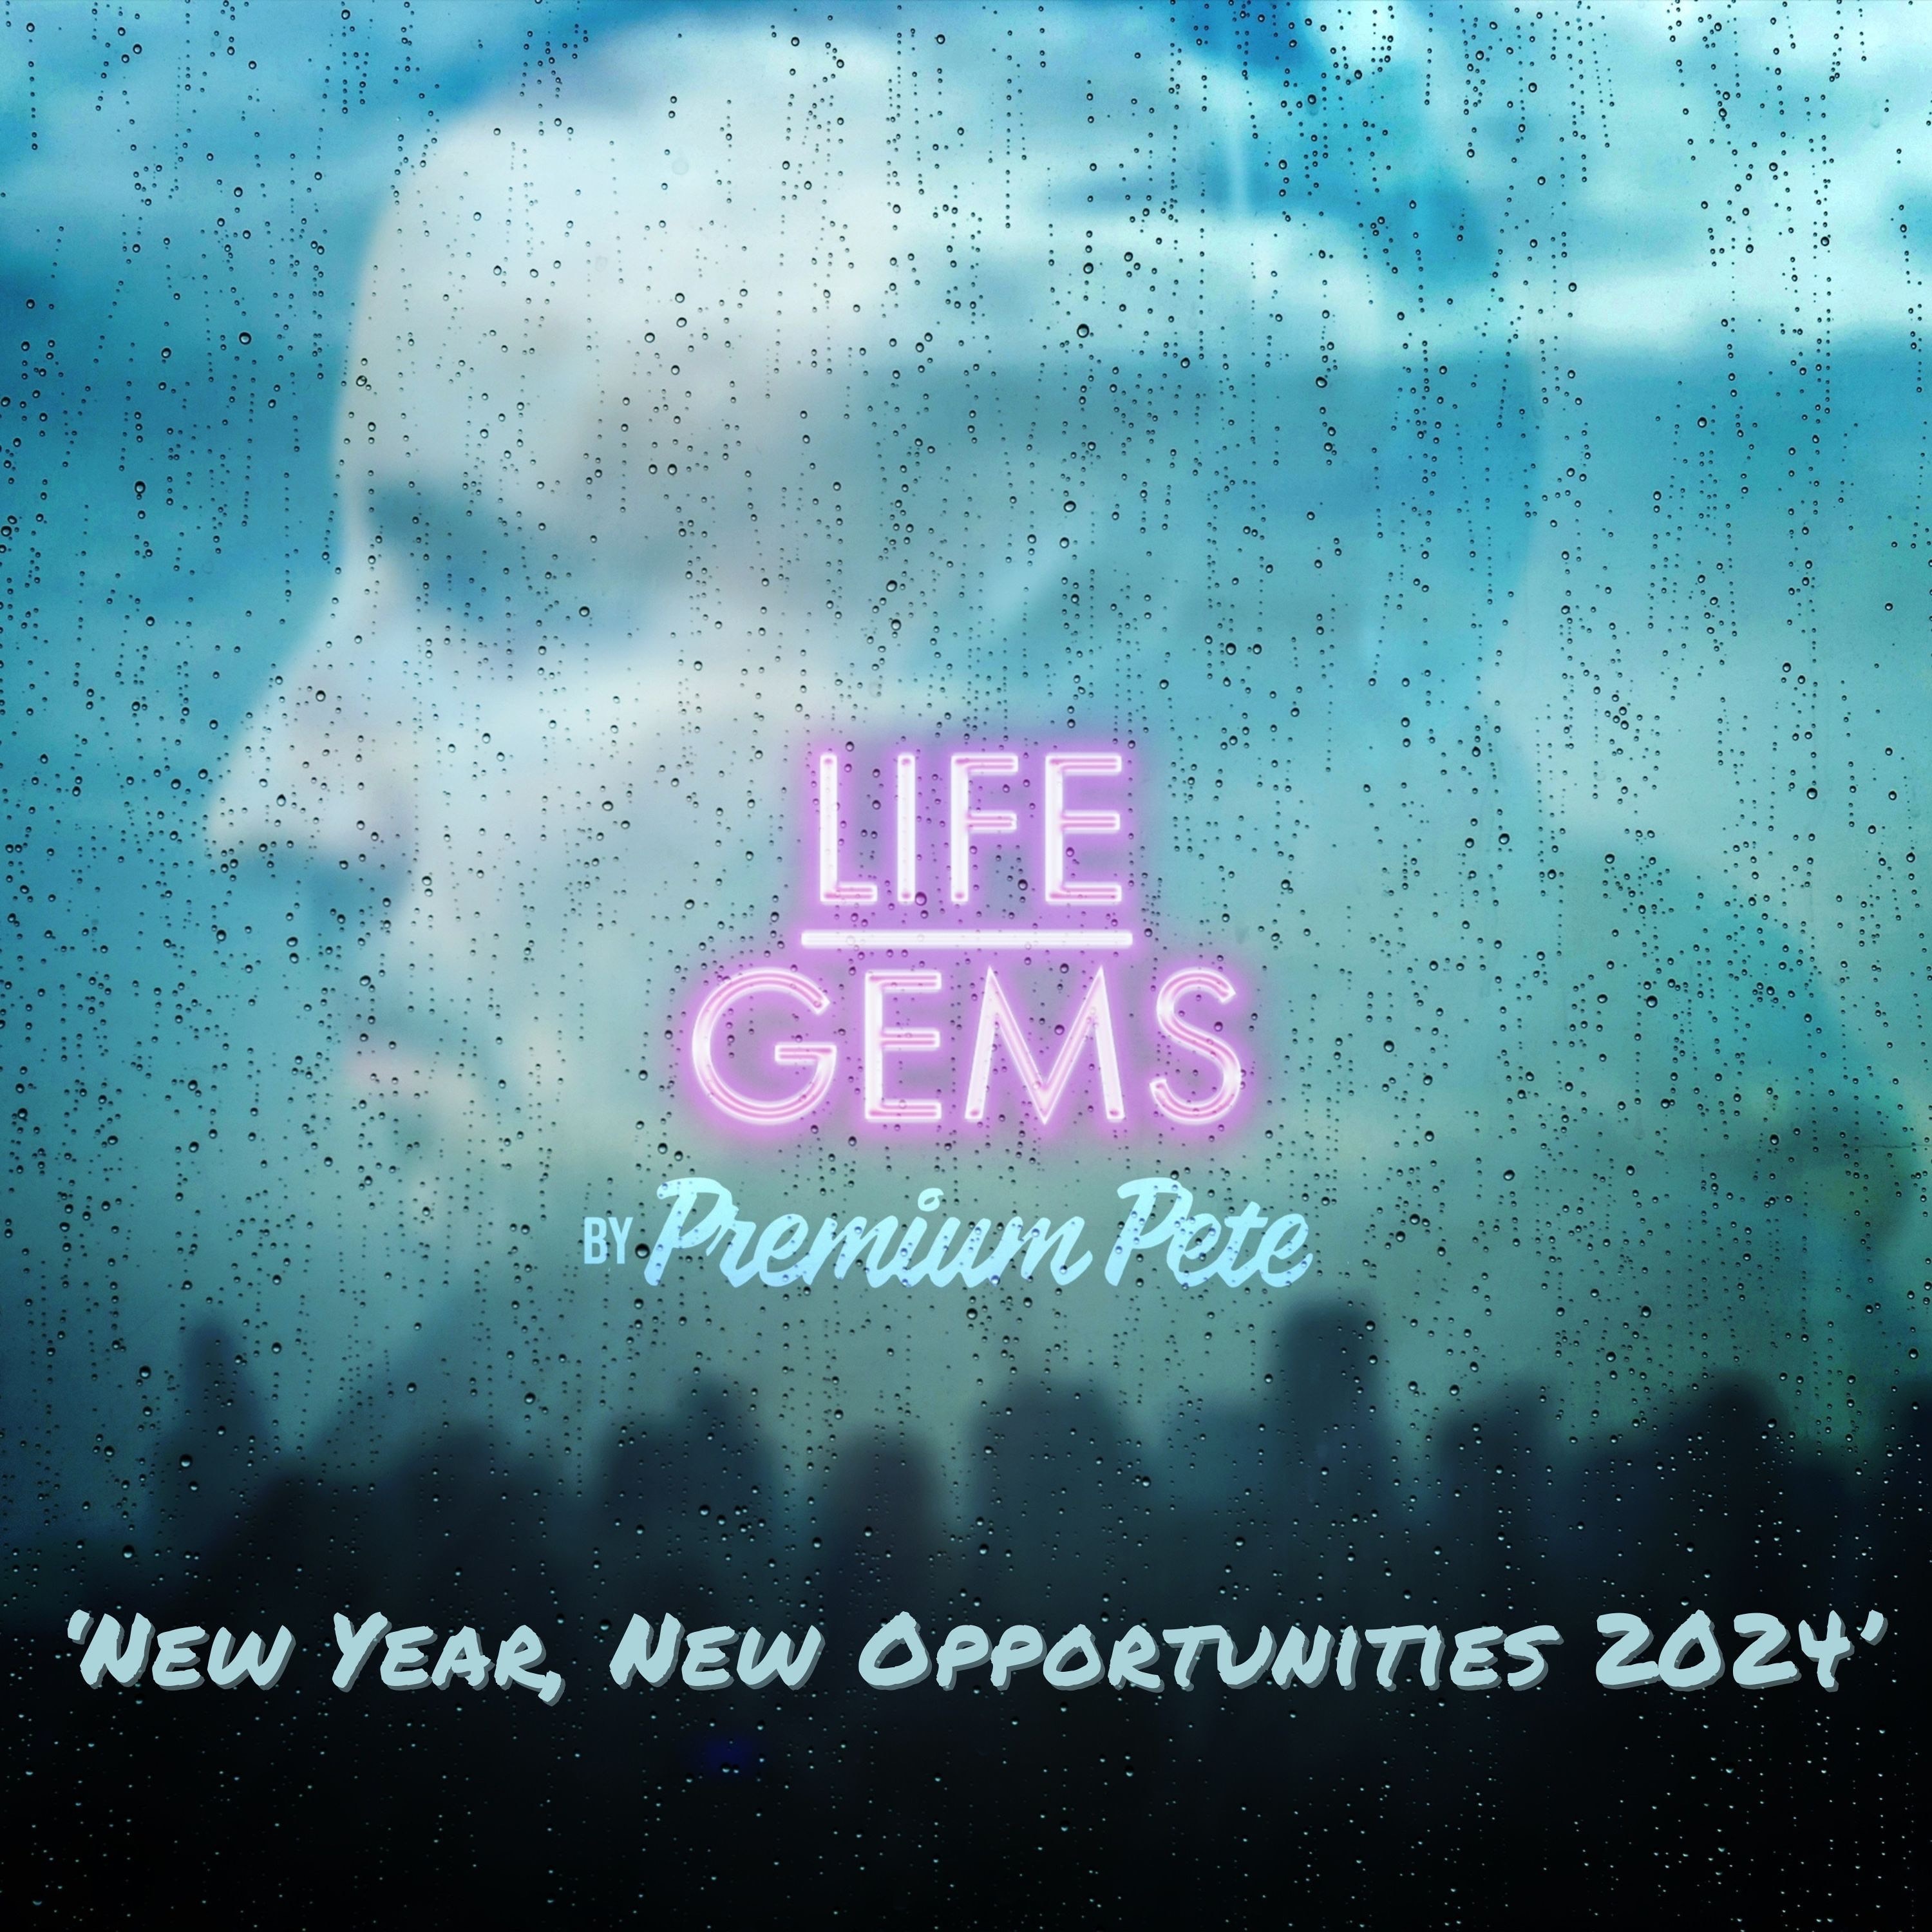 Life Gems "New Year, New Opportunities 2024"